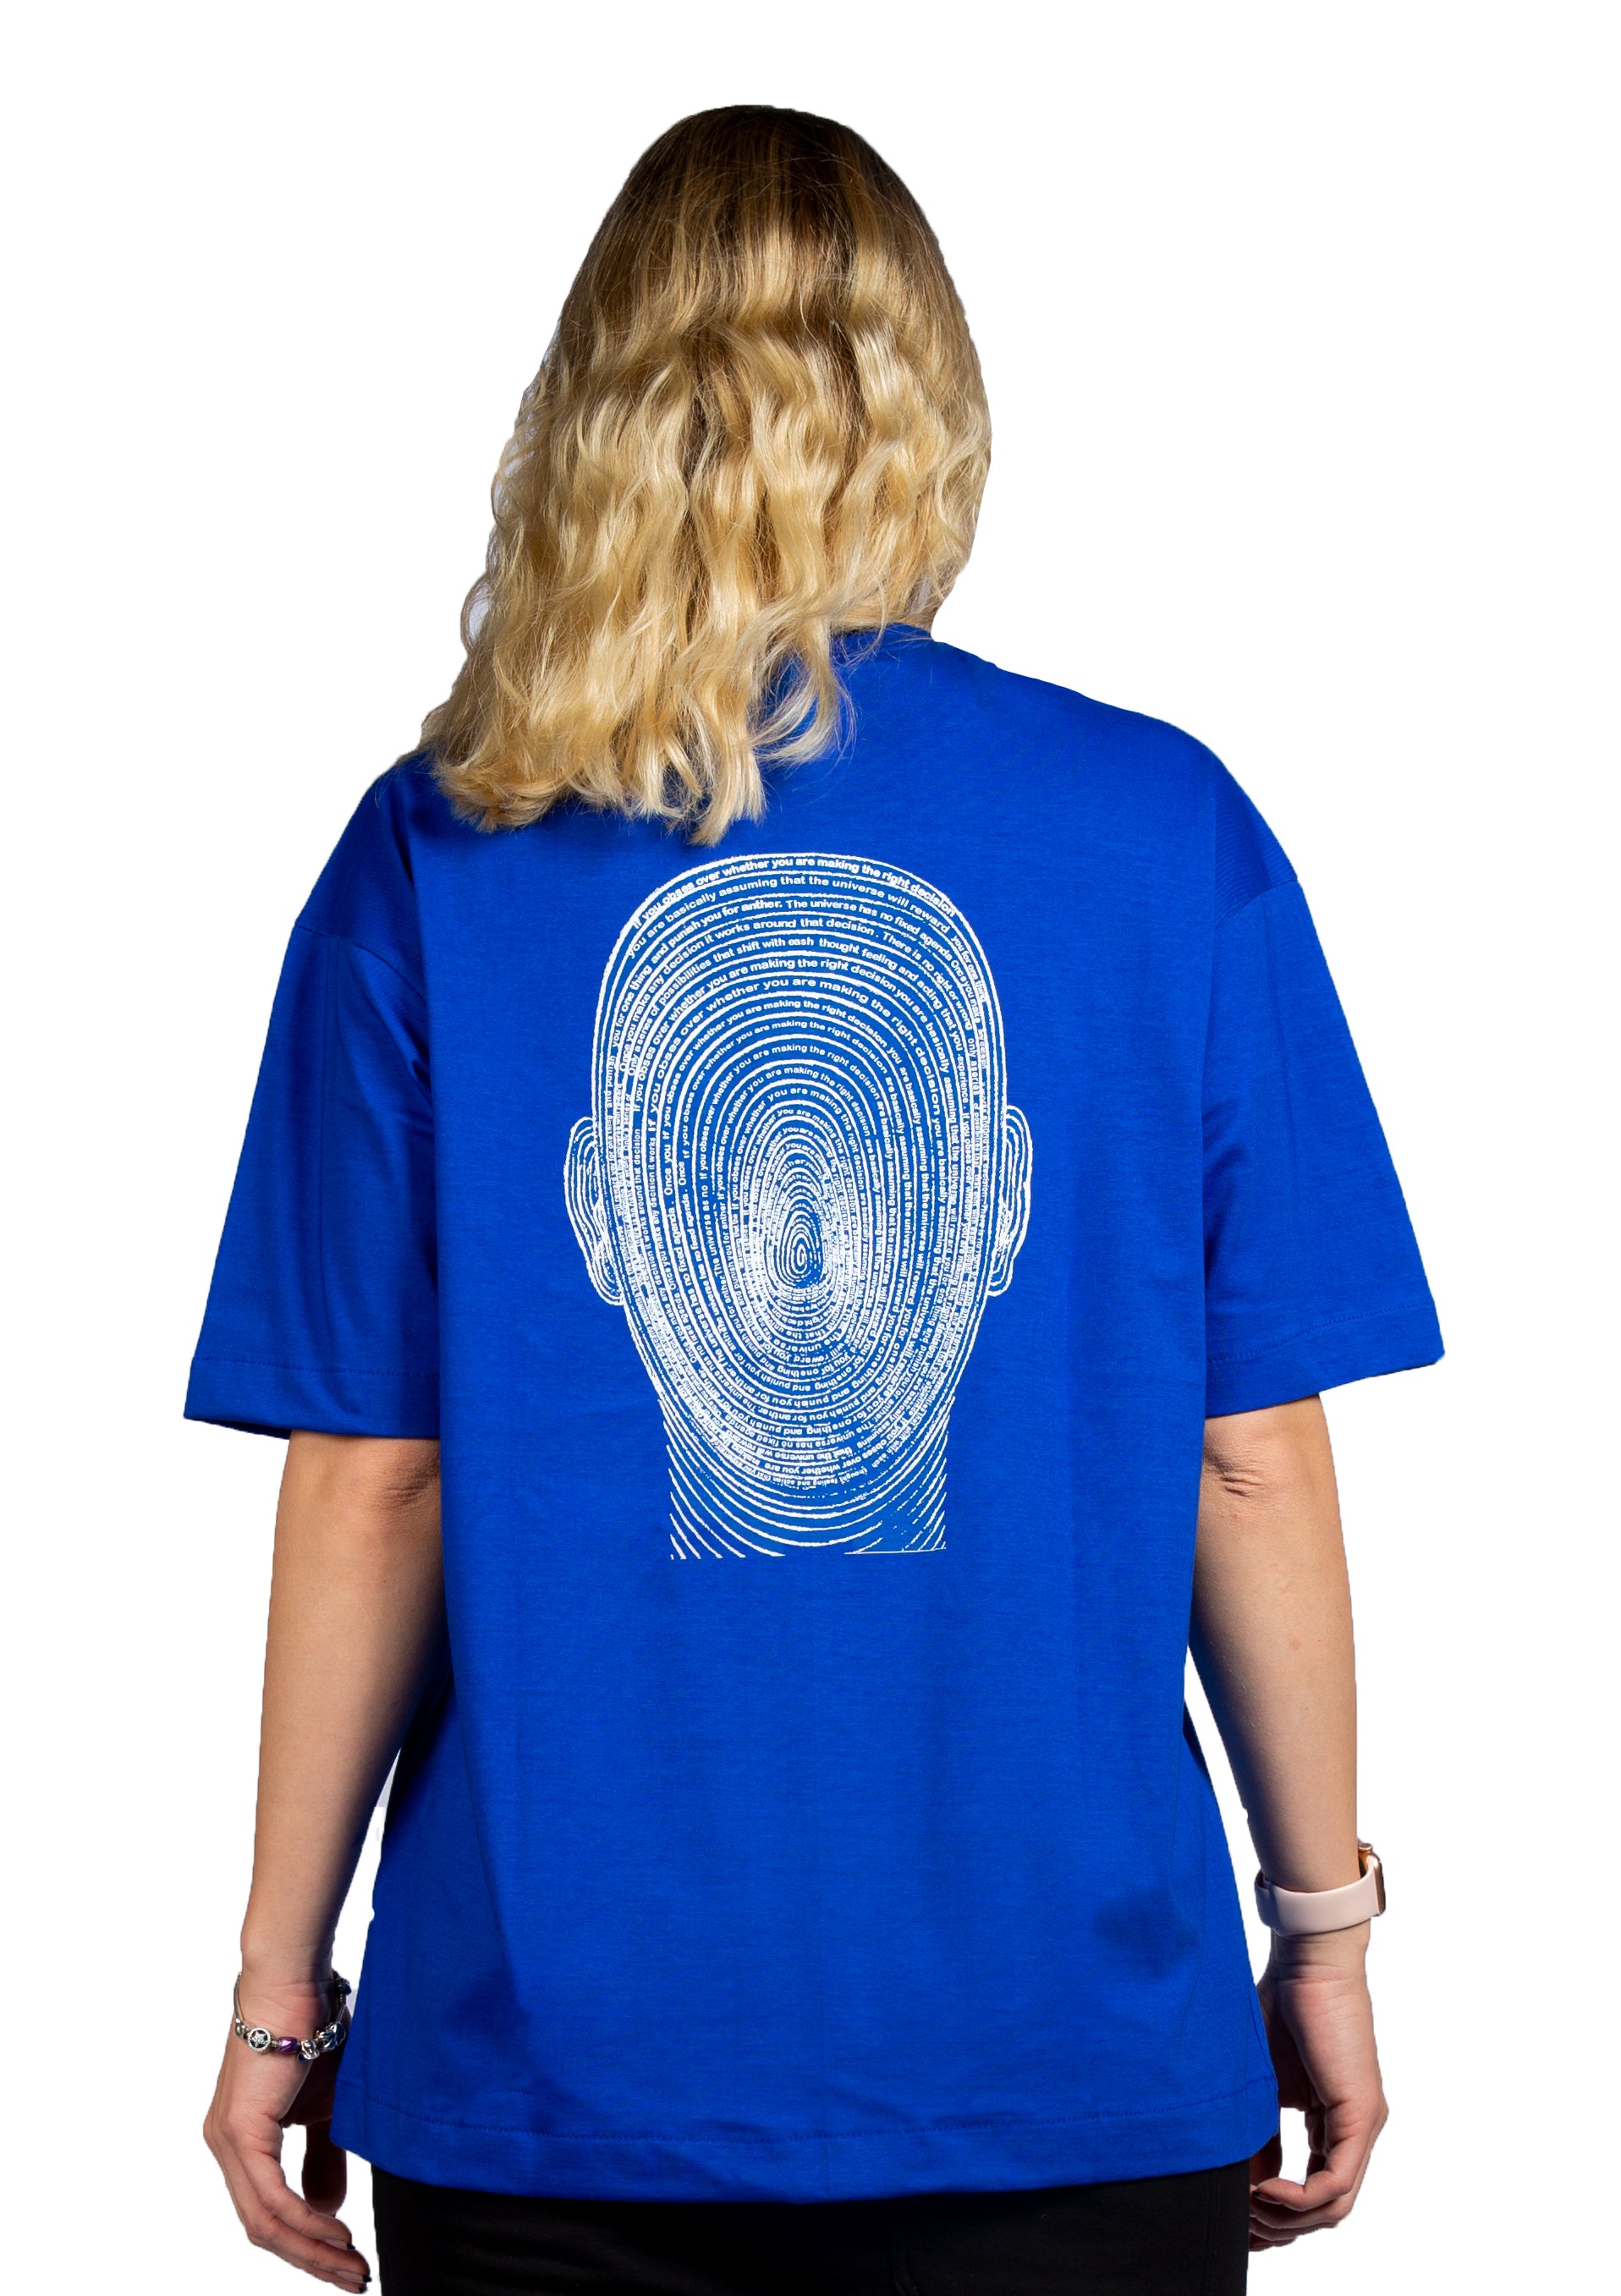 Signature Face Oversized printed Royal blue T-shirt FOR HER .